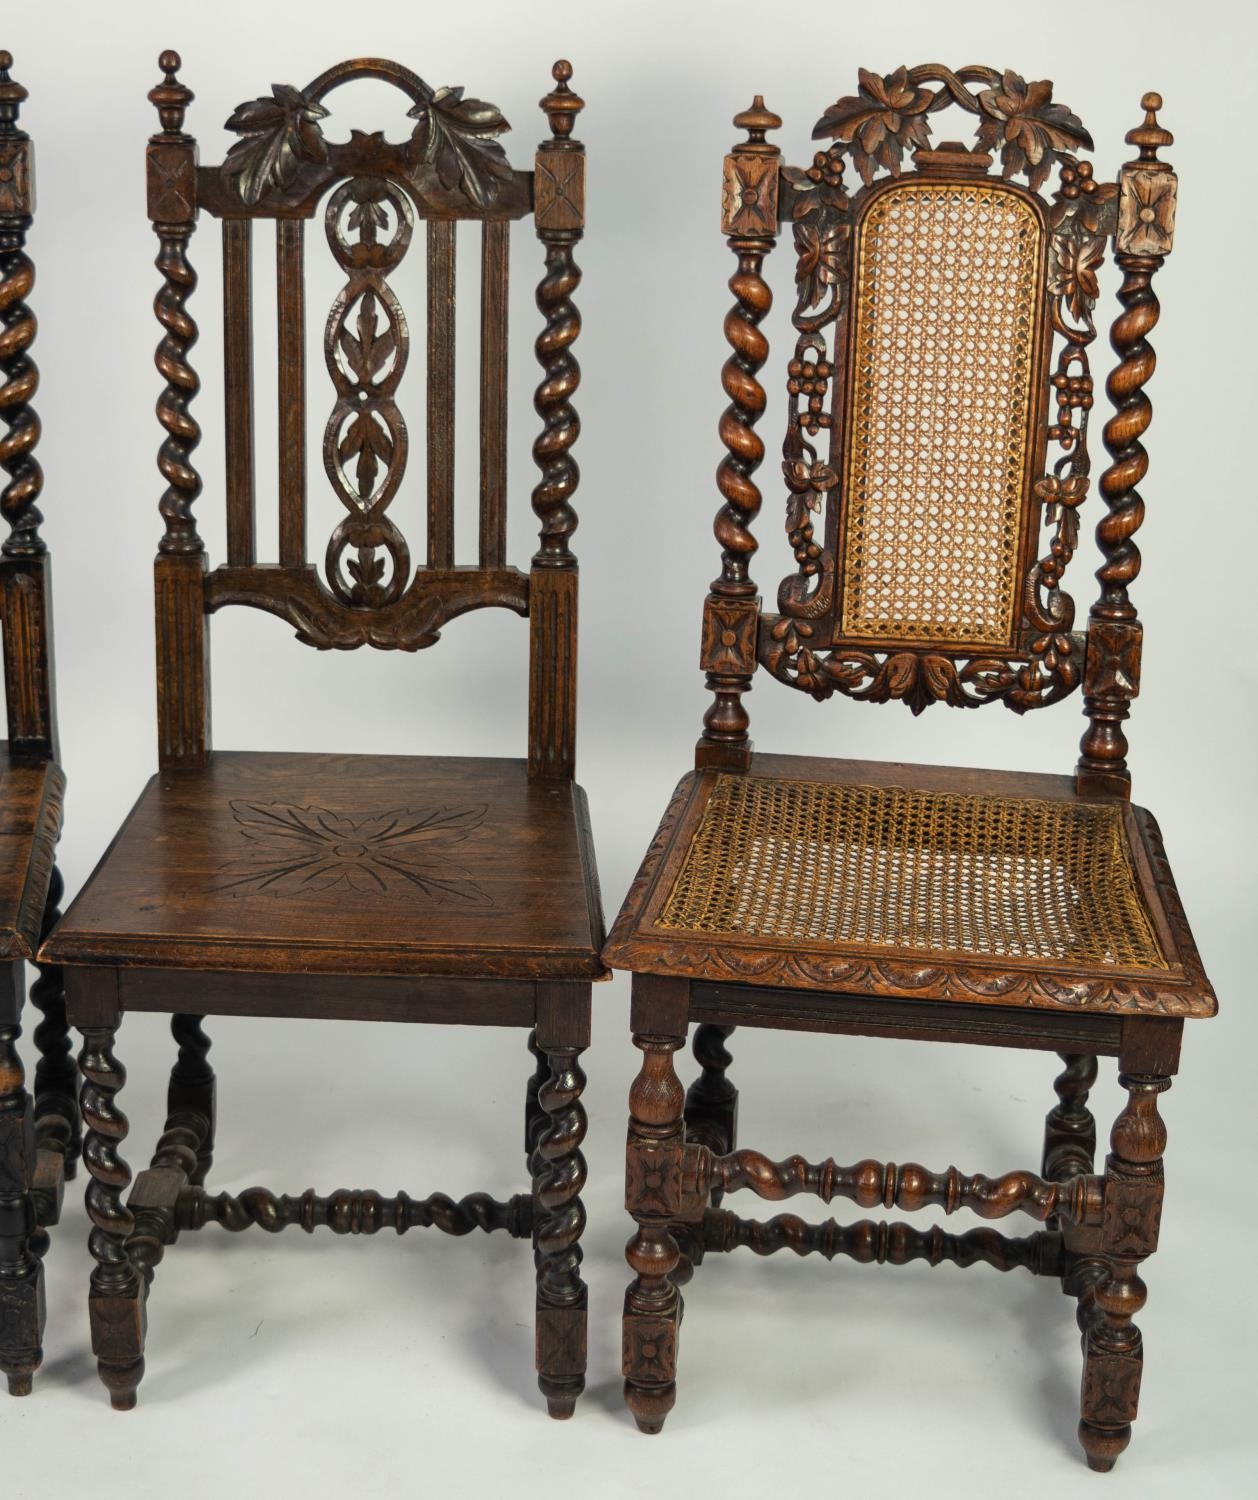 PAIR OF NINETEENTH CENTURY CARVED OAK SINGLE CHAIRS IN THE SEVENTEENTH CENTURY STYLE, each with - Image 3 of 3